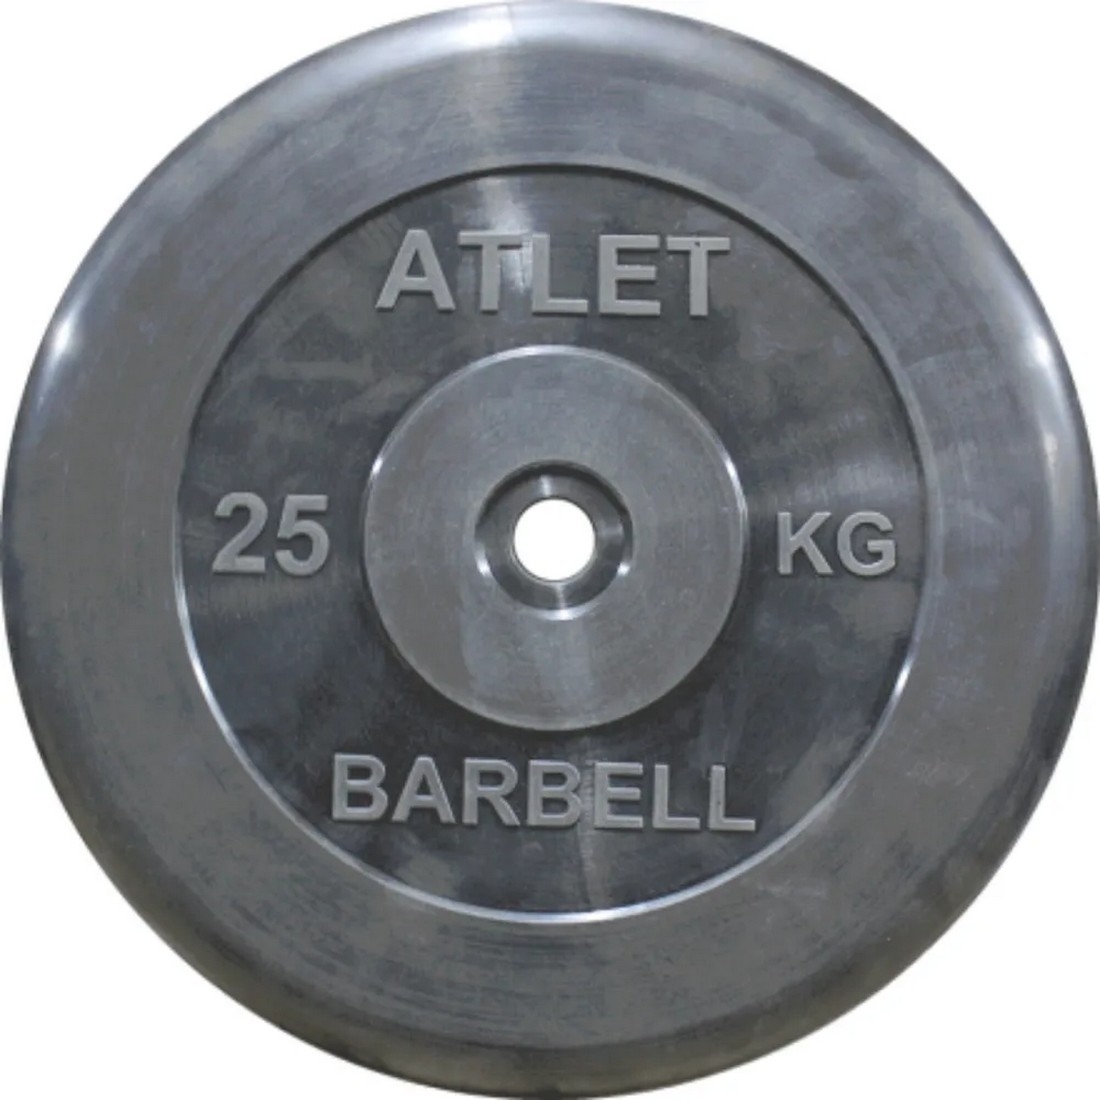    MB Barbell Atlet - 25  (31 )